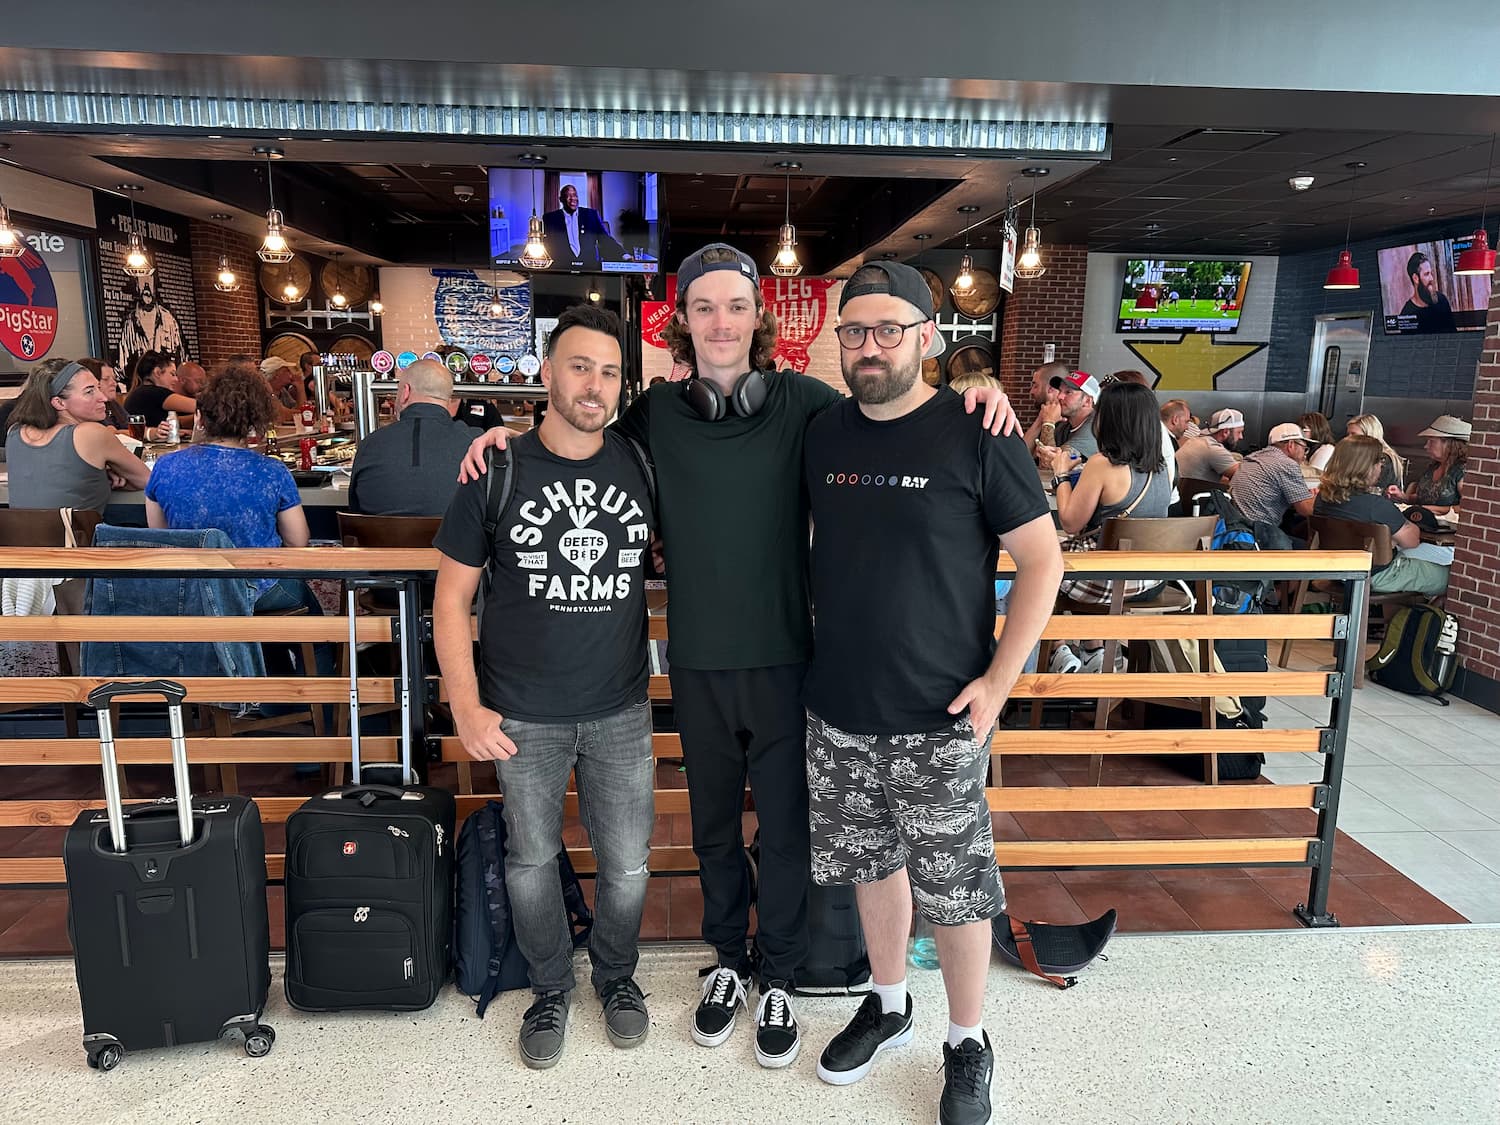 Group photo of Jason, Jesse, and Joshua at the airport leaving Nashville